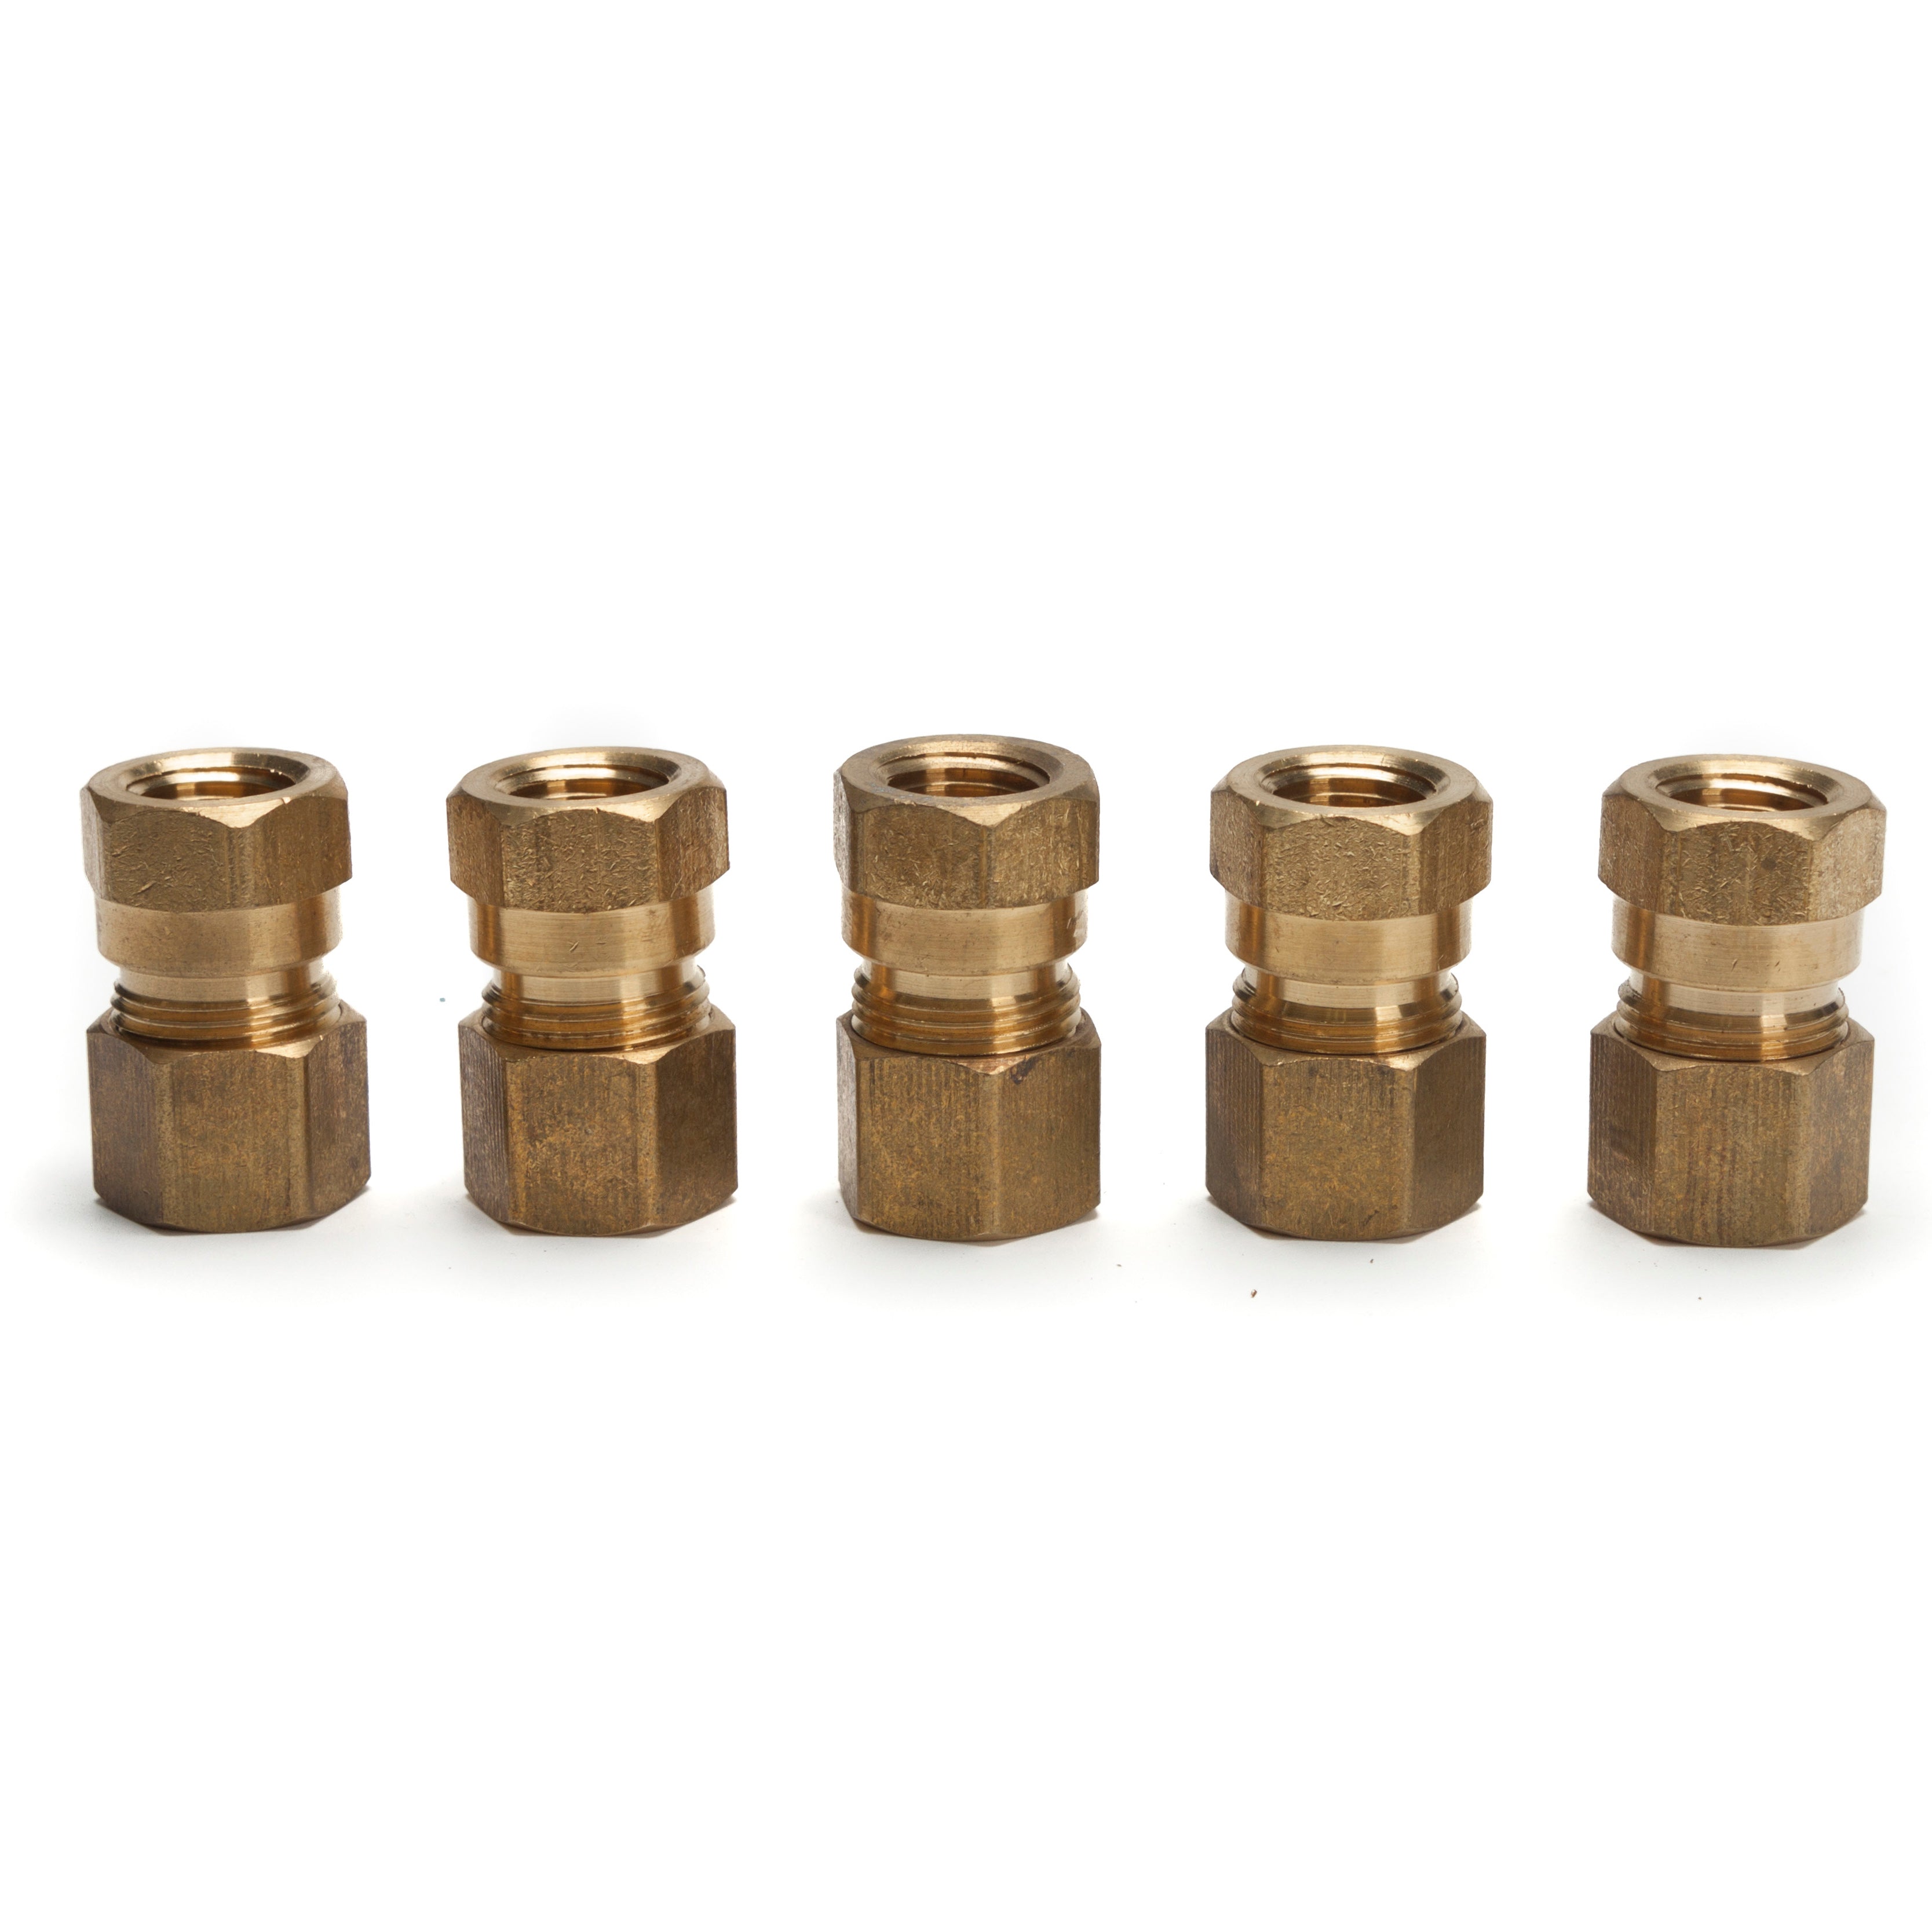 LTWFITTING Brass 1/2-Inch OD x 1/4-Inch Female NPT Compression Connector Fitting(Pack of 5)